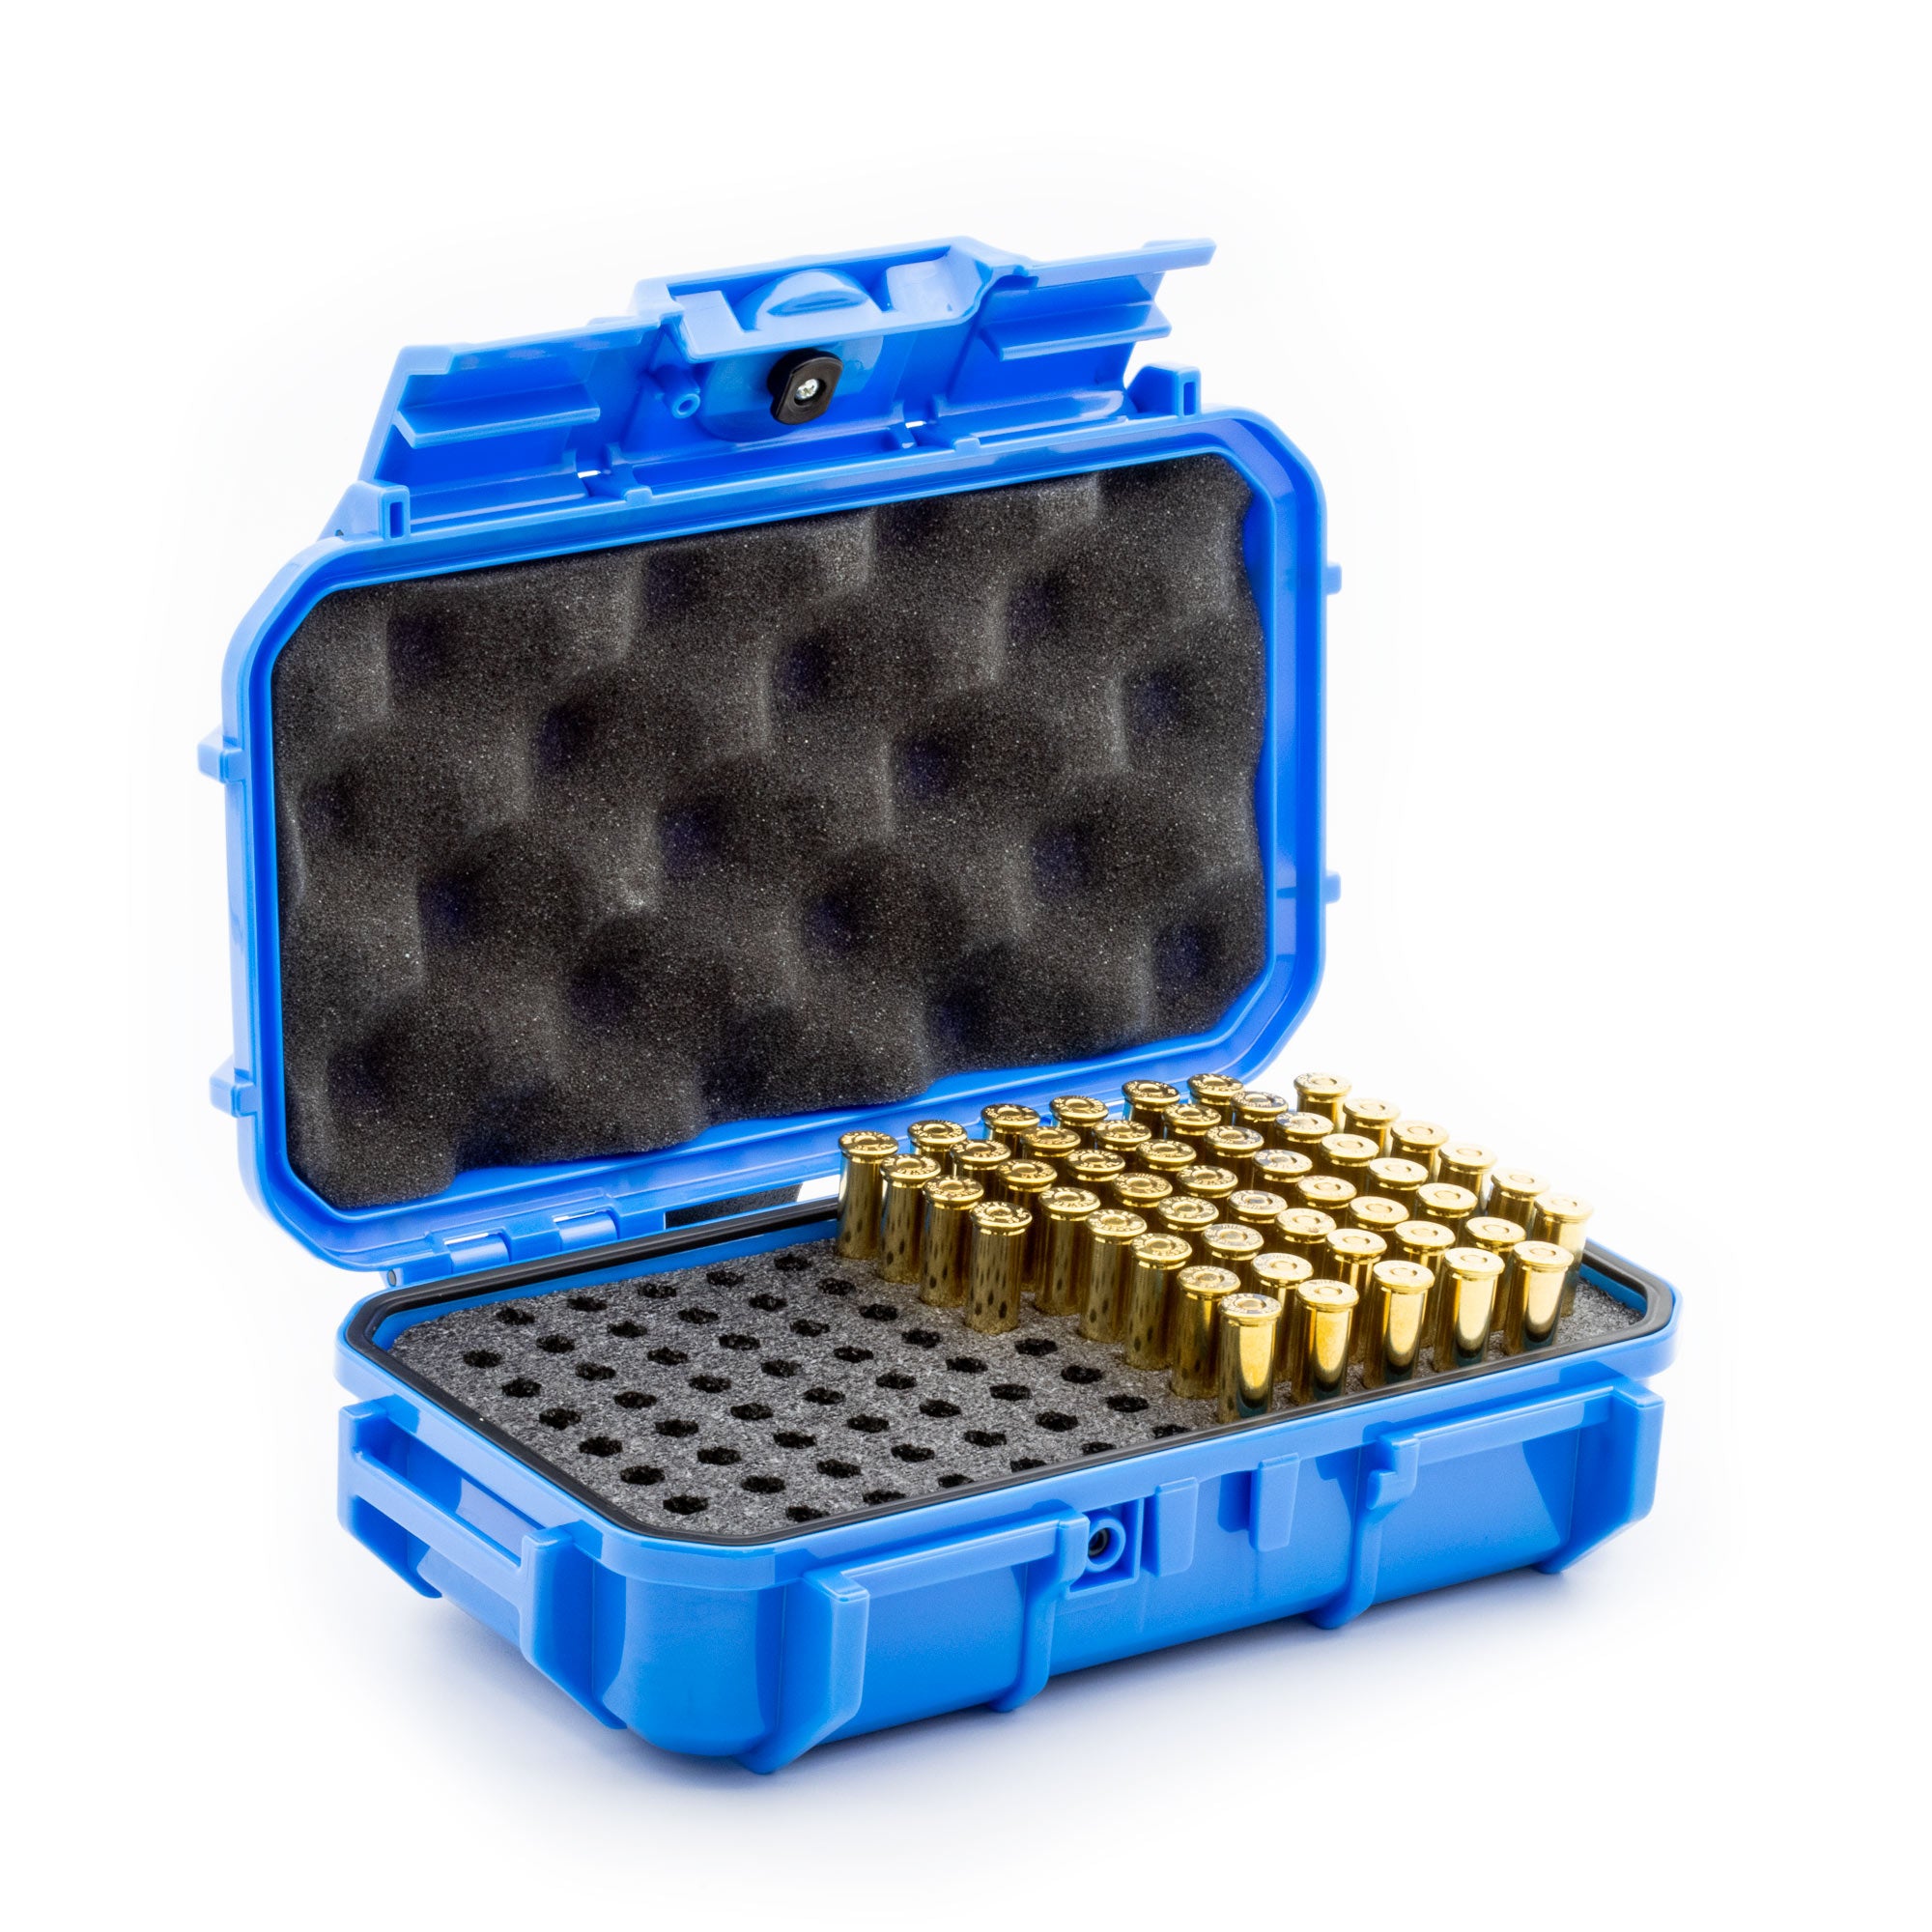  Evergreen Micro Pistol Ammo Case for Storing .22-9mm Ammo  Bullets - Travel Safe/Mil Spec/Waterproof/USA Made (52 Black, Pistol Ammo)  : Sports & Outdoors